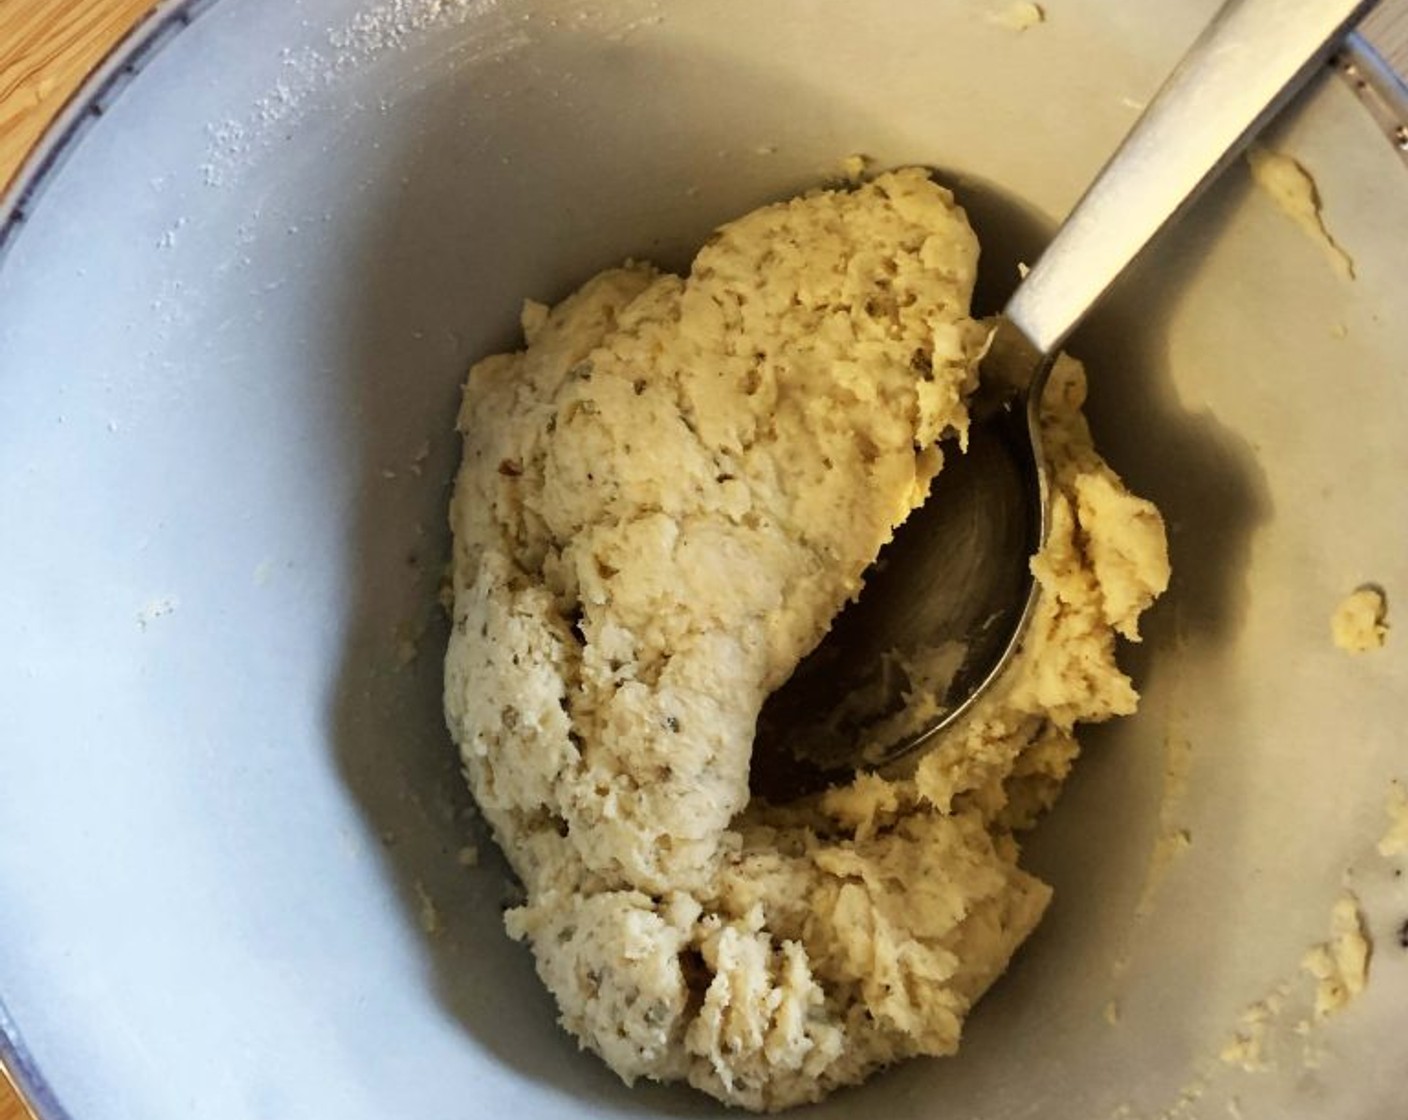 step 3 Add the Active Dry Yeast (1 tsp), Extra-Virgin Olive Oil (1 Tbsp), Coconut Vinegar (1 Tbsp), and give it a stir. Slowly pour in Water (2.5 oz) and sprinkle with Salt (1 pinch). Mix until you form a soft and smooth dough.